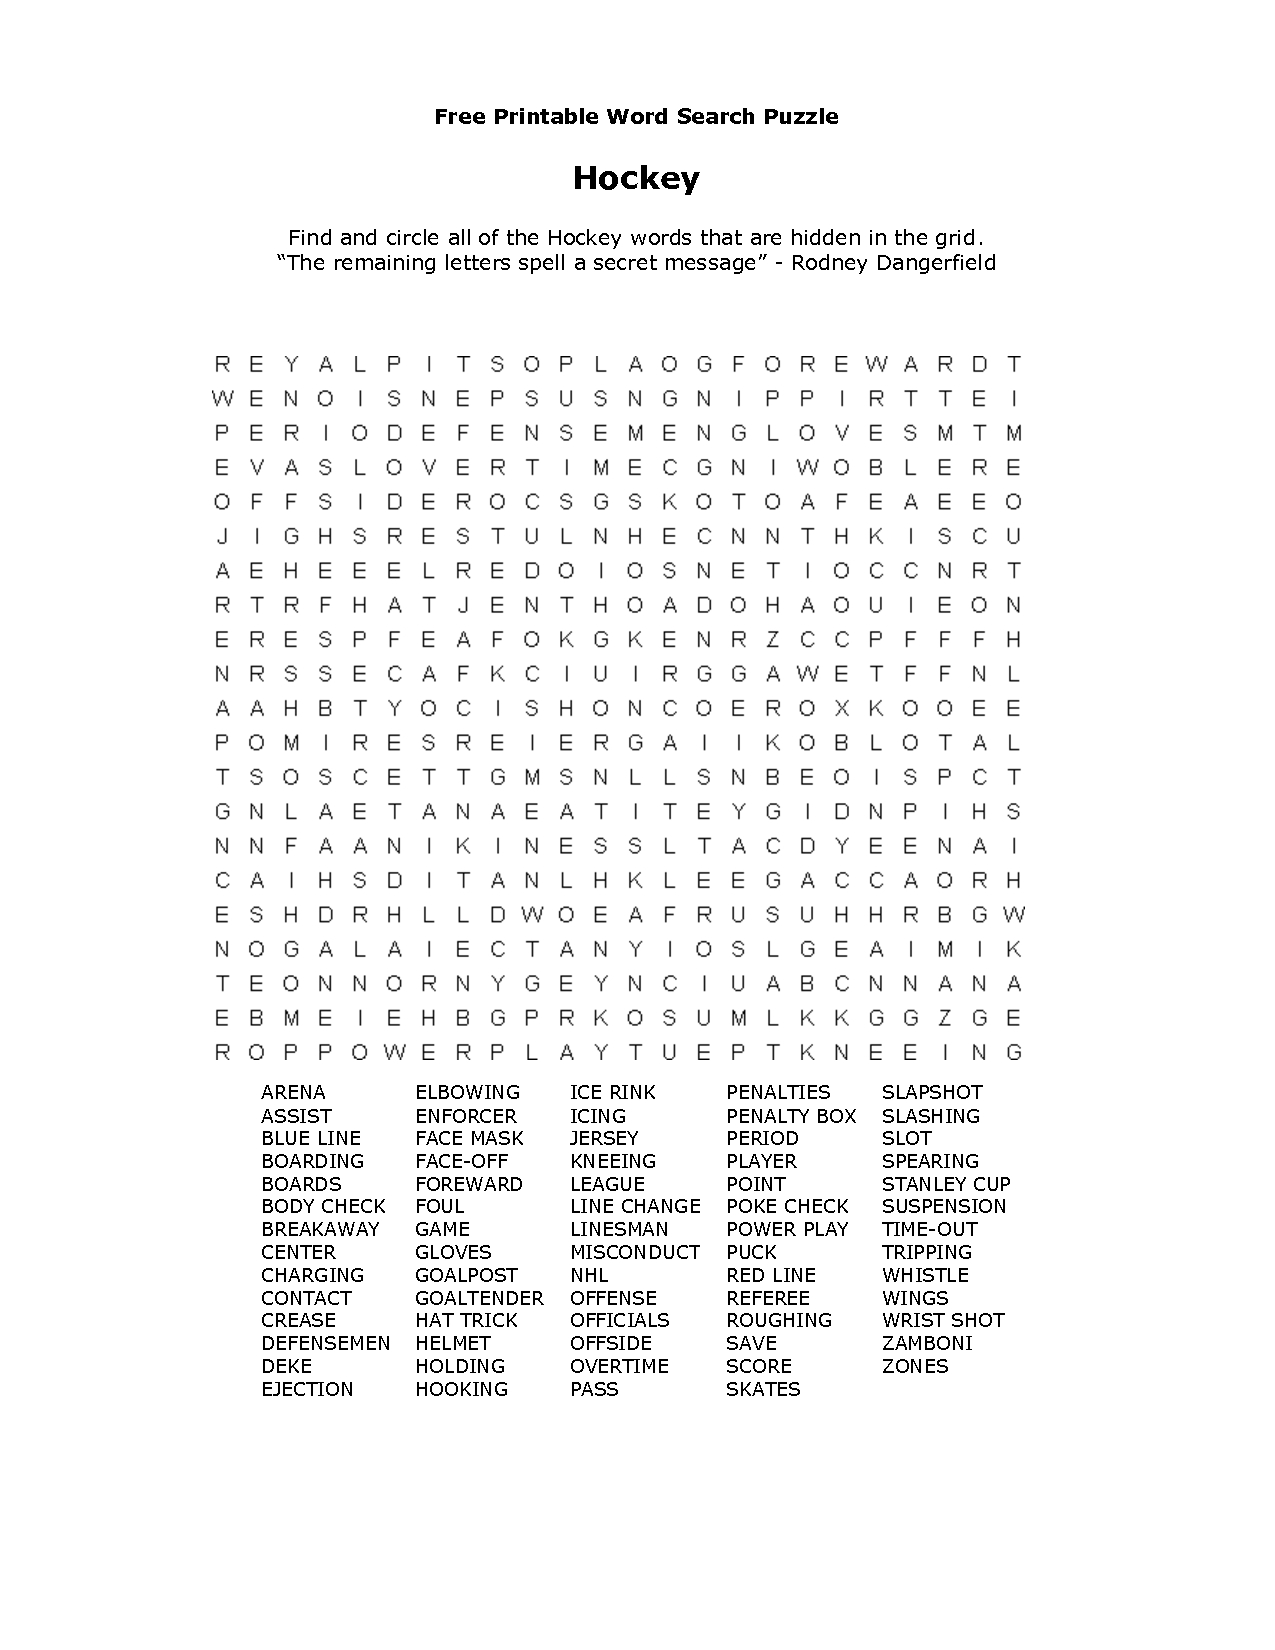 Free Printable Word Searches | Kiddo Shelter | Games | Free - Free Word Search With Hidden Message Printable